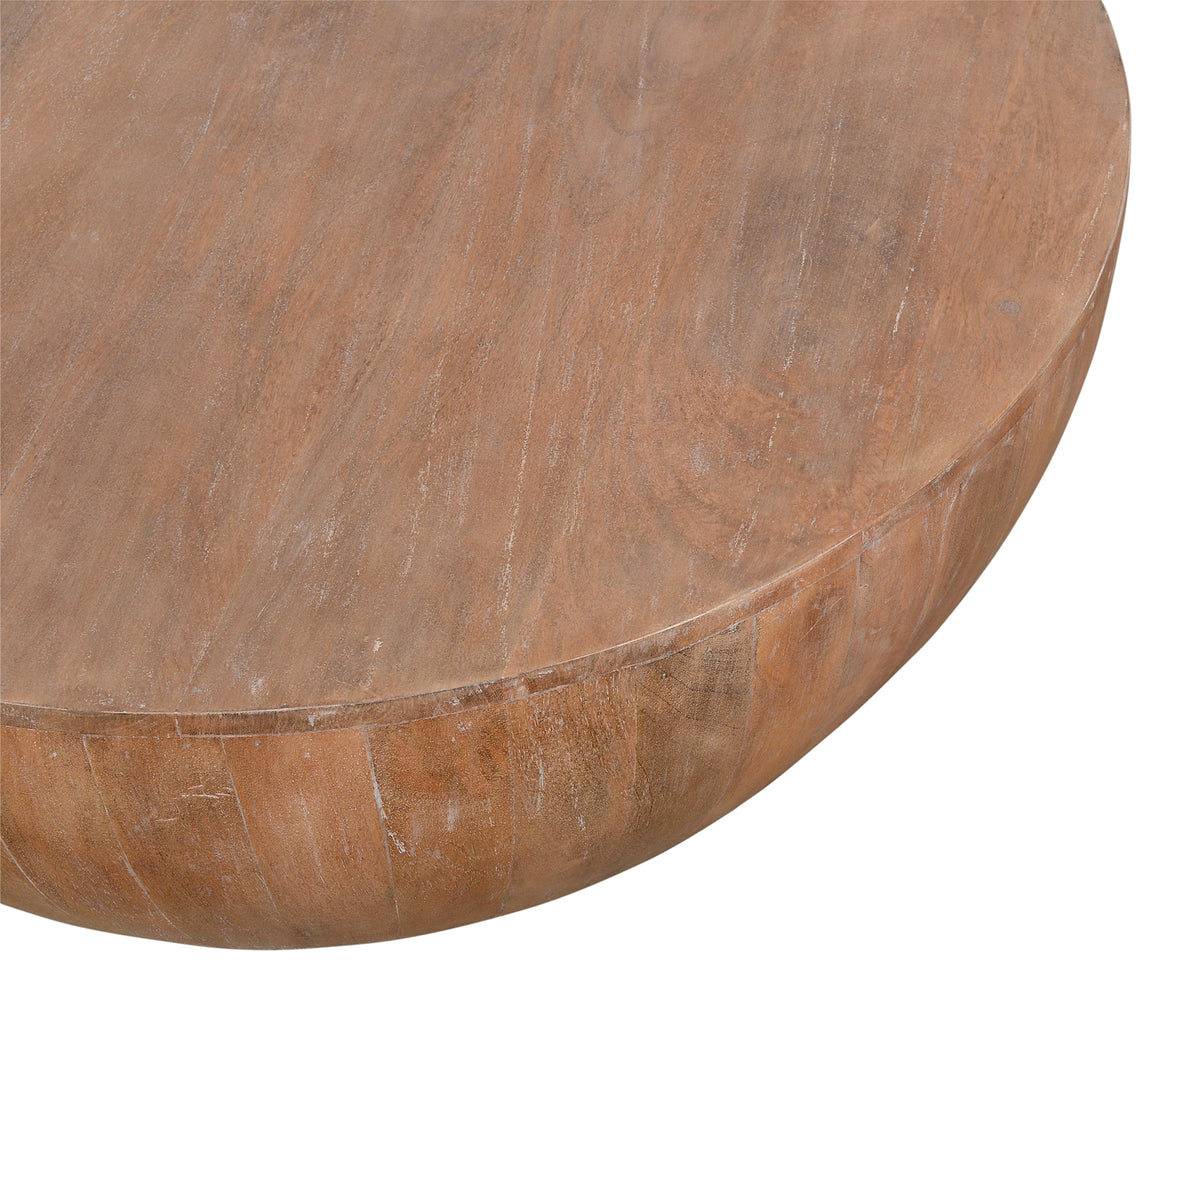 Arthur Drum Shape Wooden Coffee Table with Plank Design Base, Distressed Brown - UPT-32182